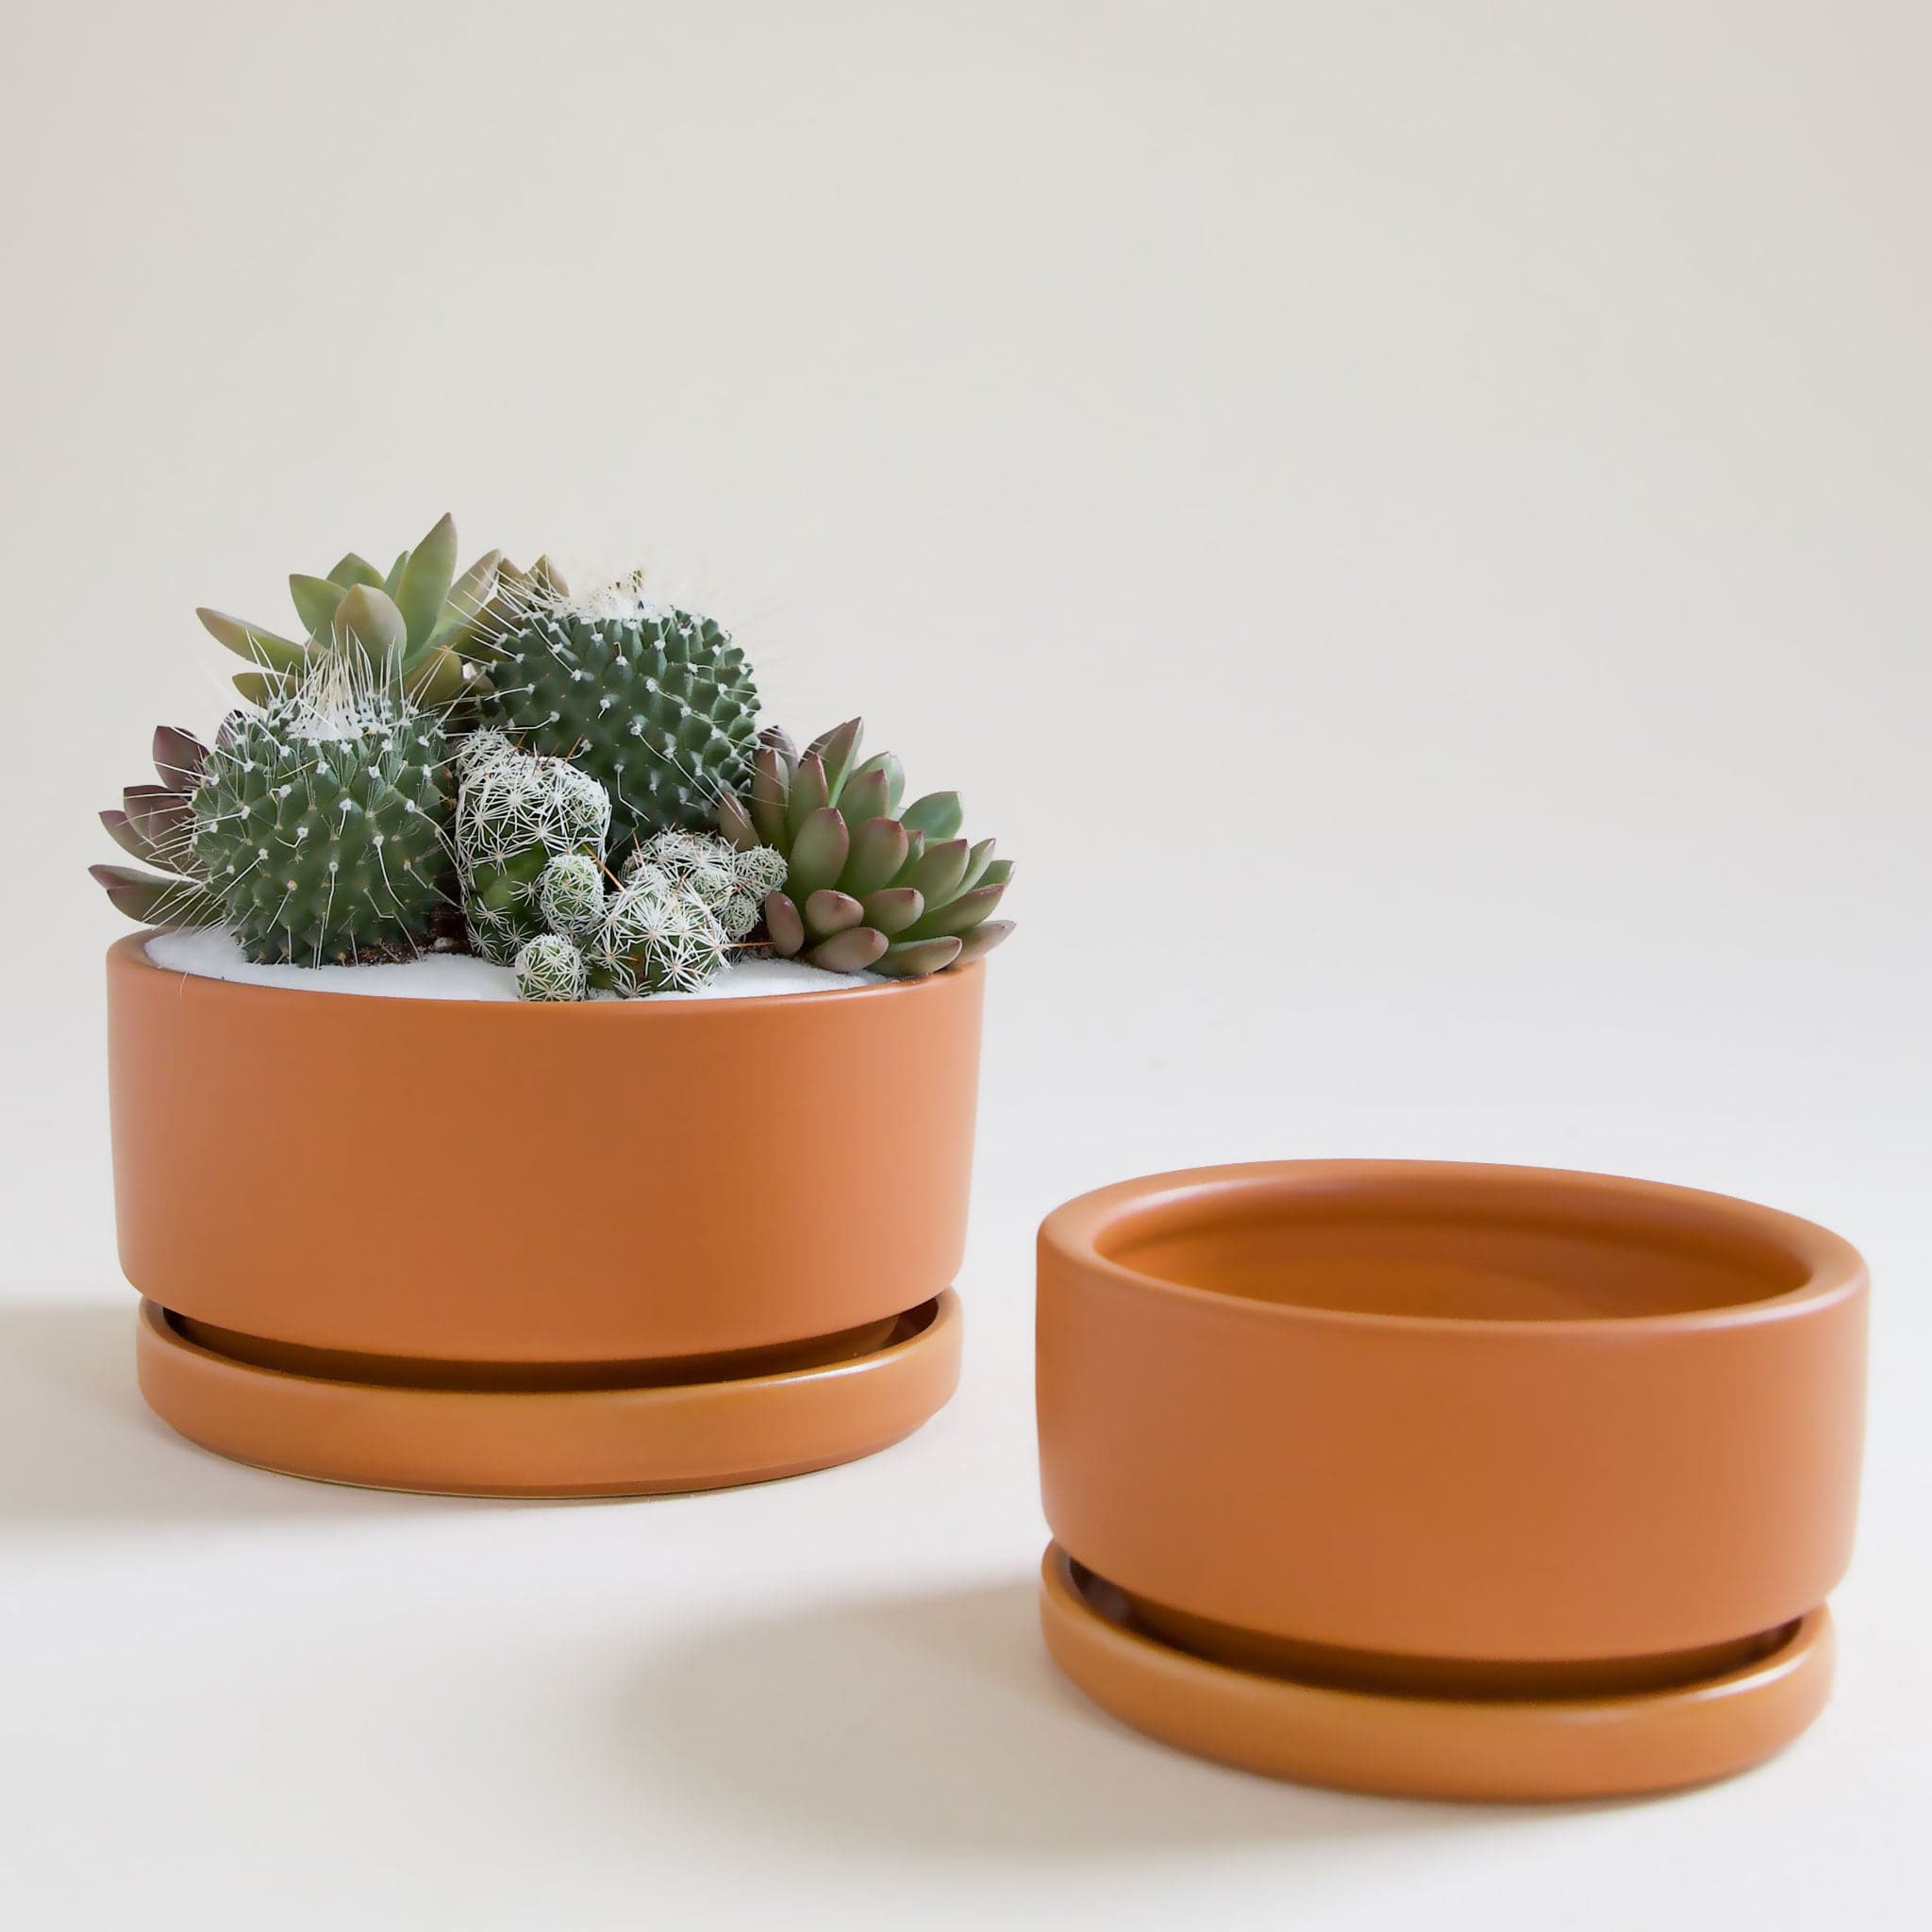 On a white background is two different sized low profile brownish orange ceramic planter with a removable tray and filled with a succulent and cacti arrangement that is not included with purchase.